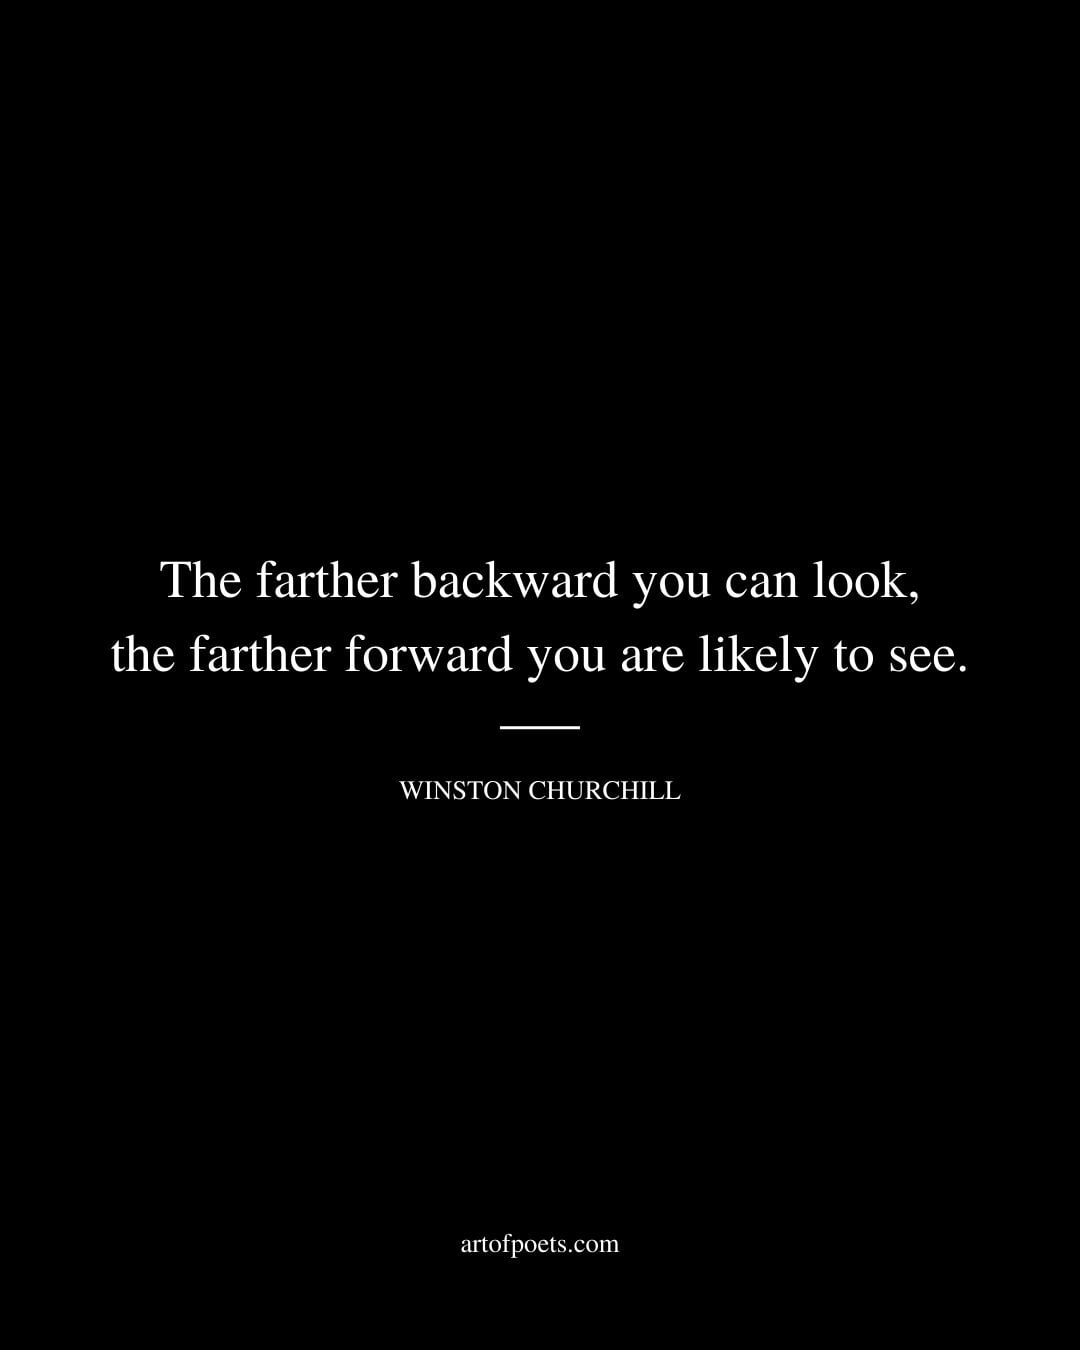 The farther backward you can look the farther forward you are likely to see